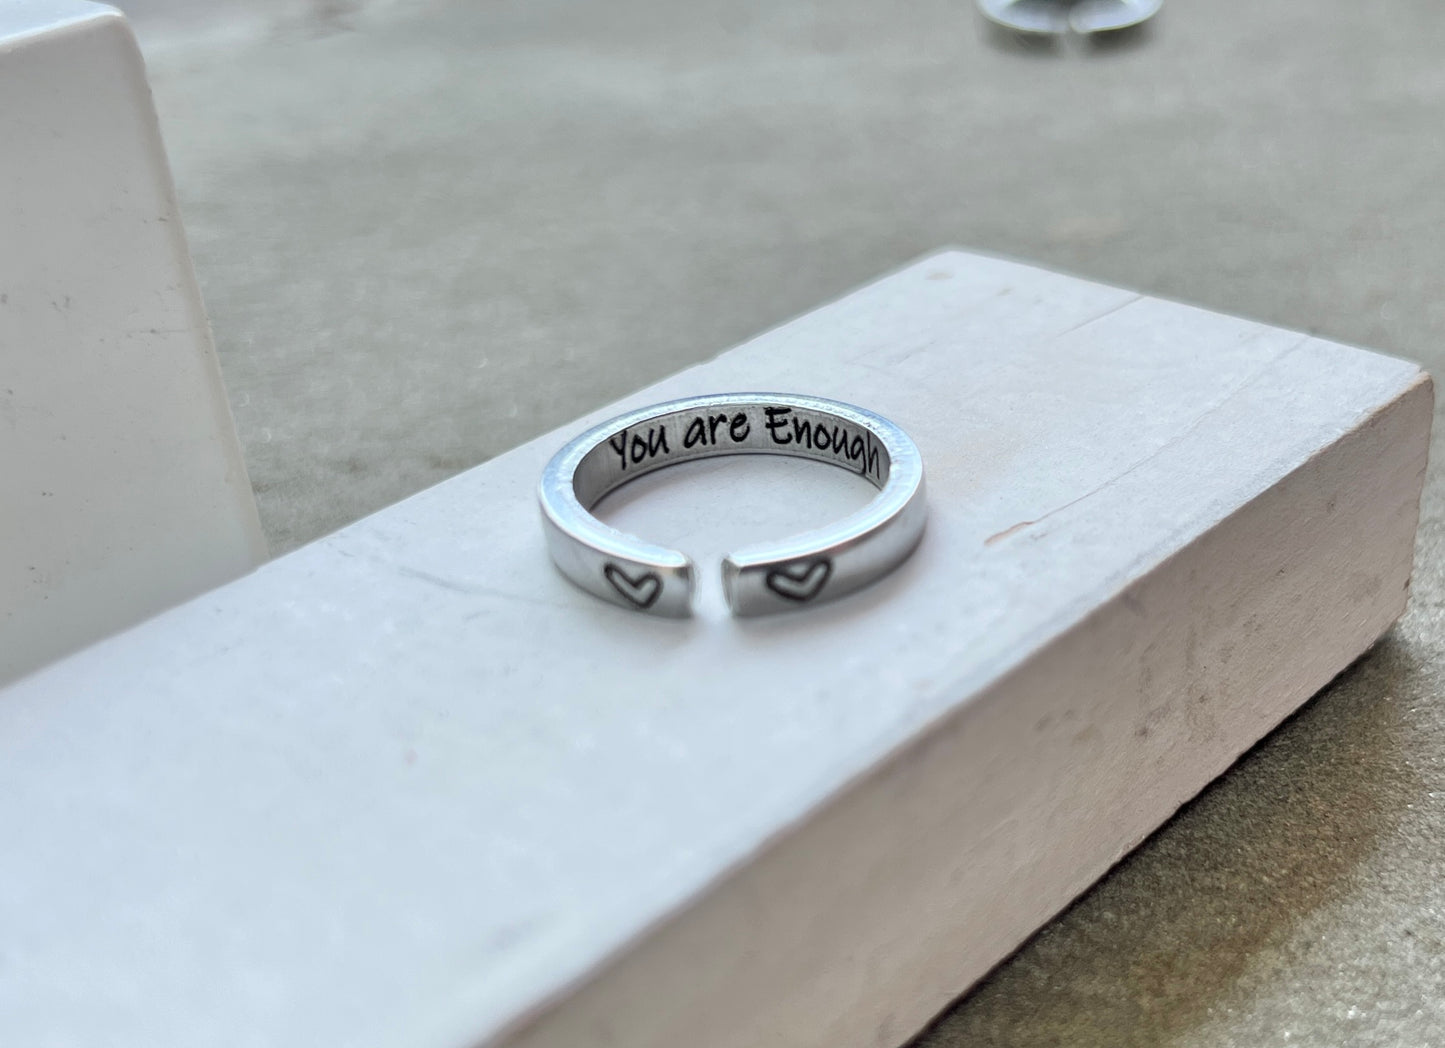 You are Enough Ring, Aluminum and Adjustable